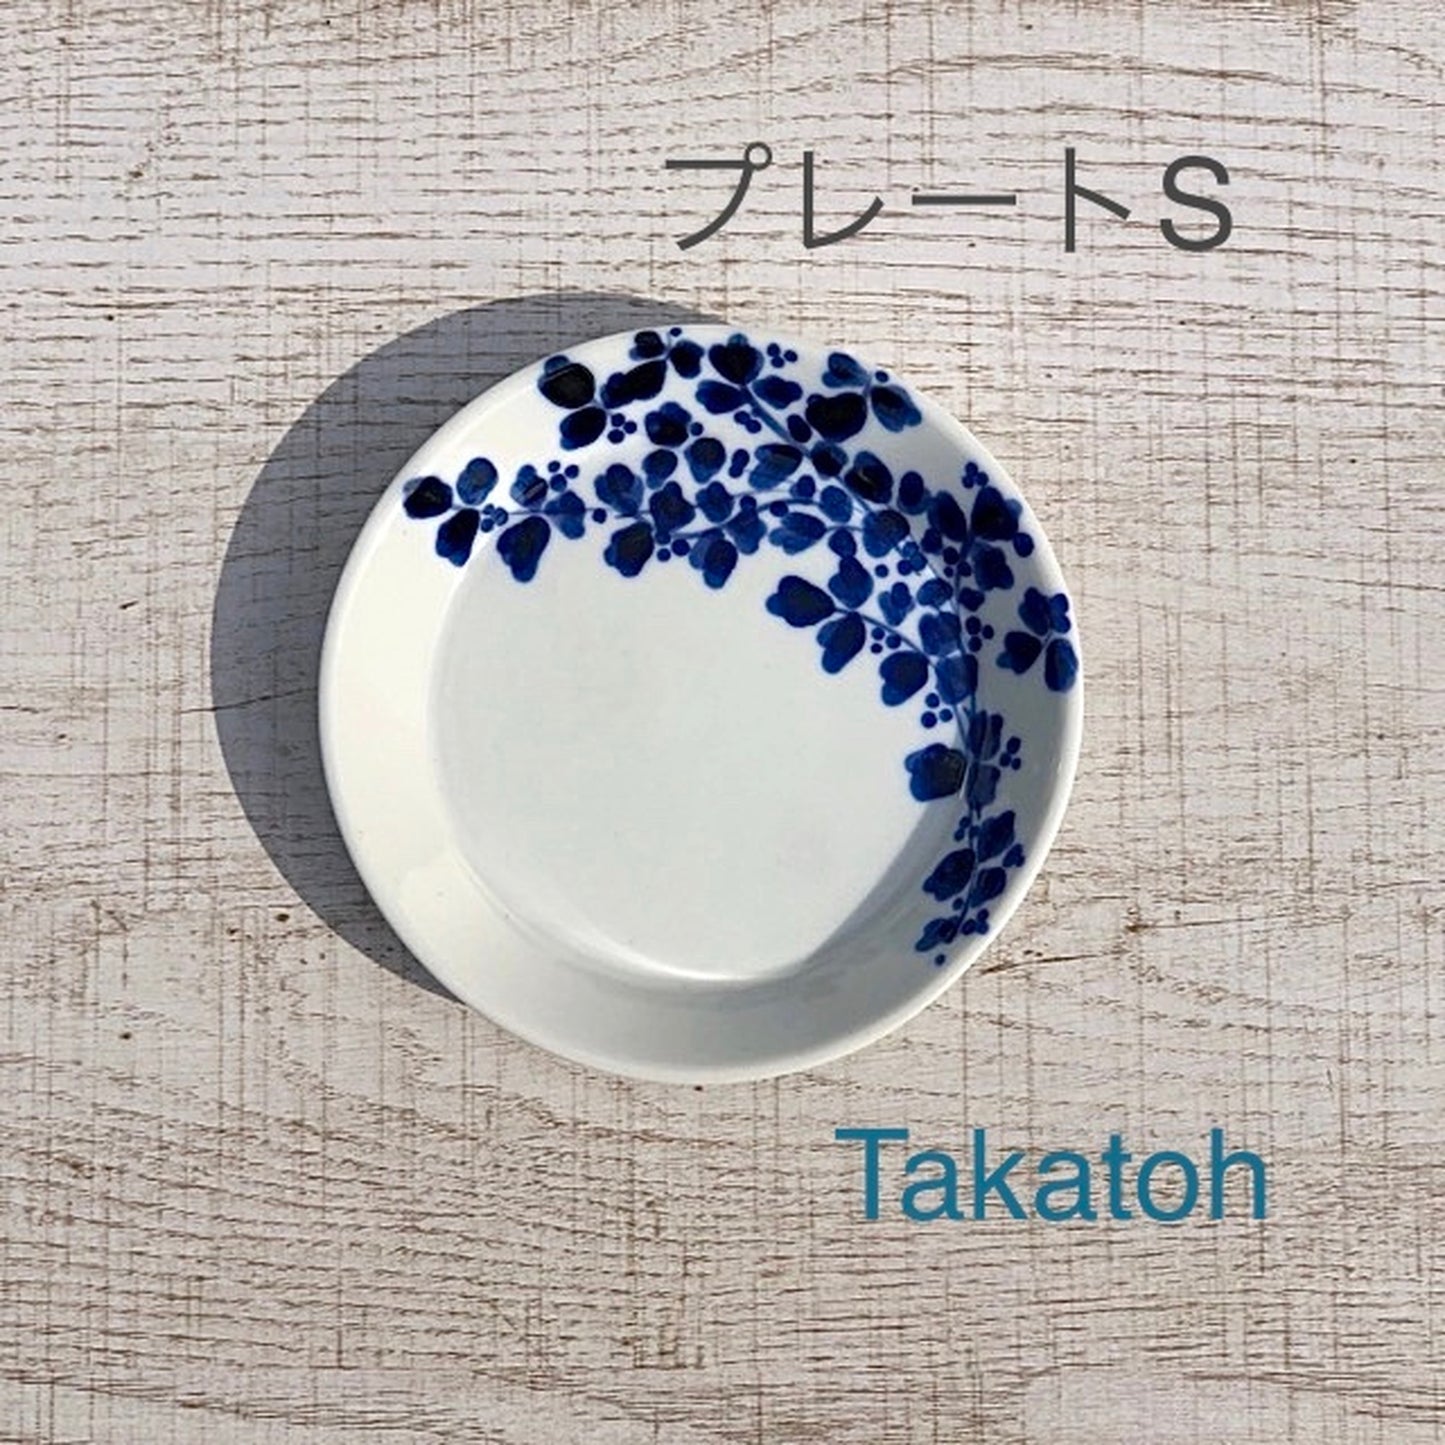 [Hasami ware] [Nakazen] [Arabesque] [Plate S] 11.5 cm plant pattern arabesque pattern small plate soy sauce plate Hasami ware fashionable adult colorful cute